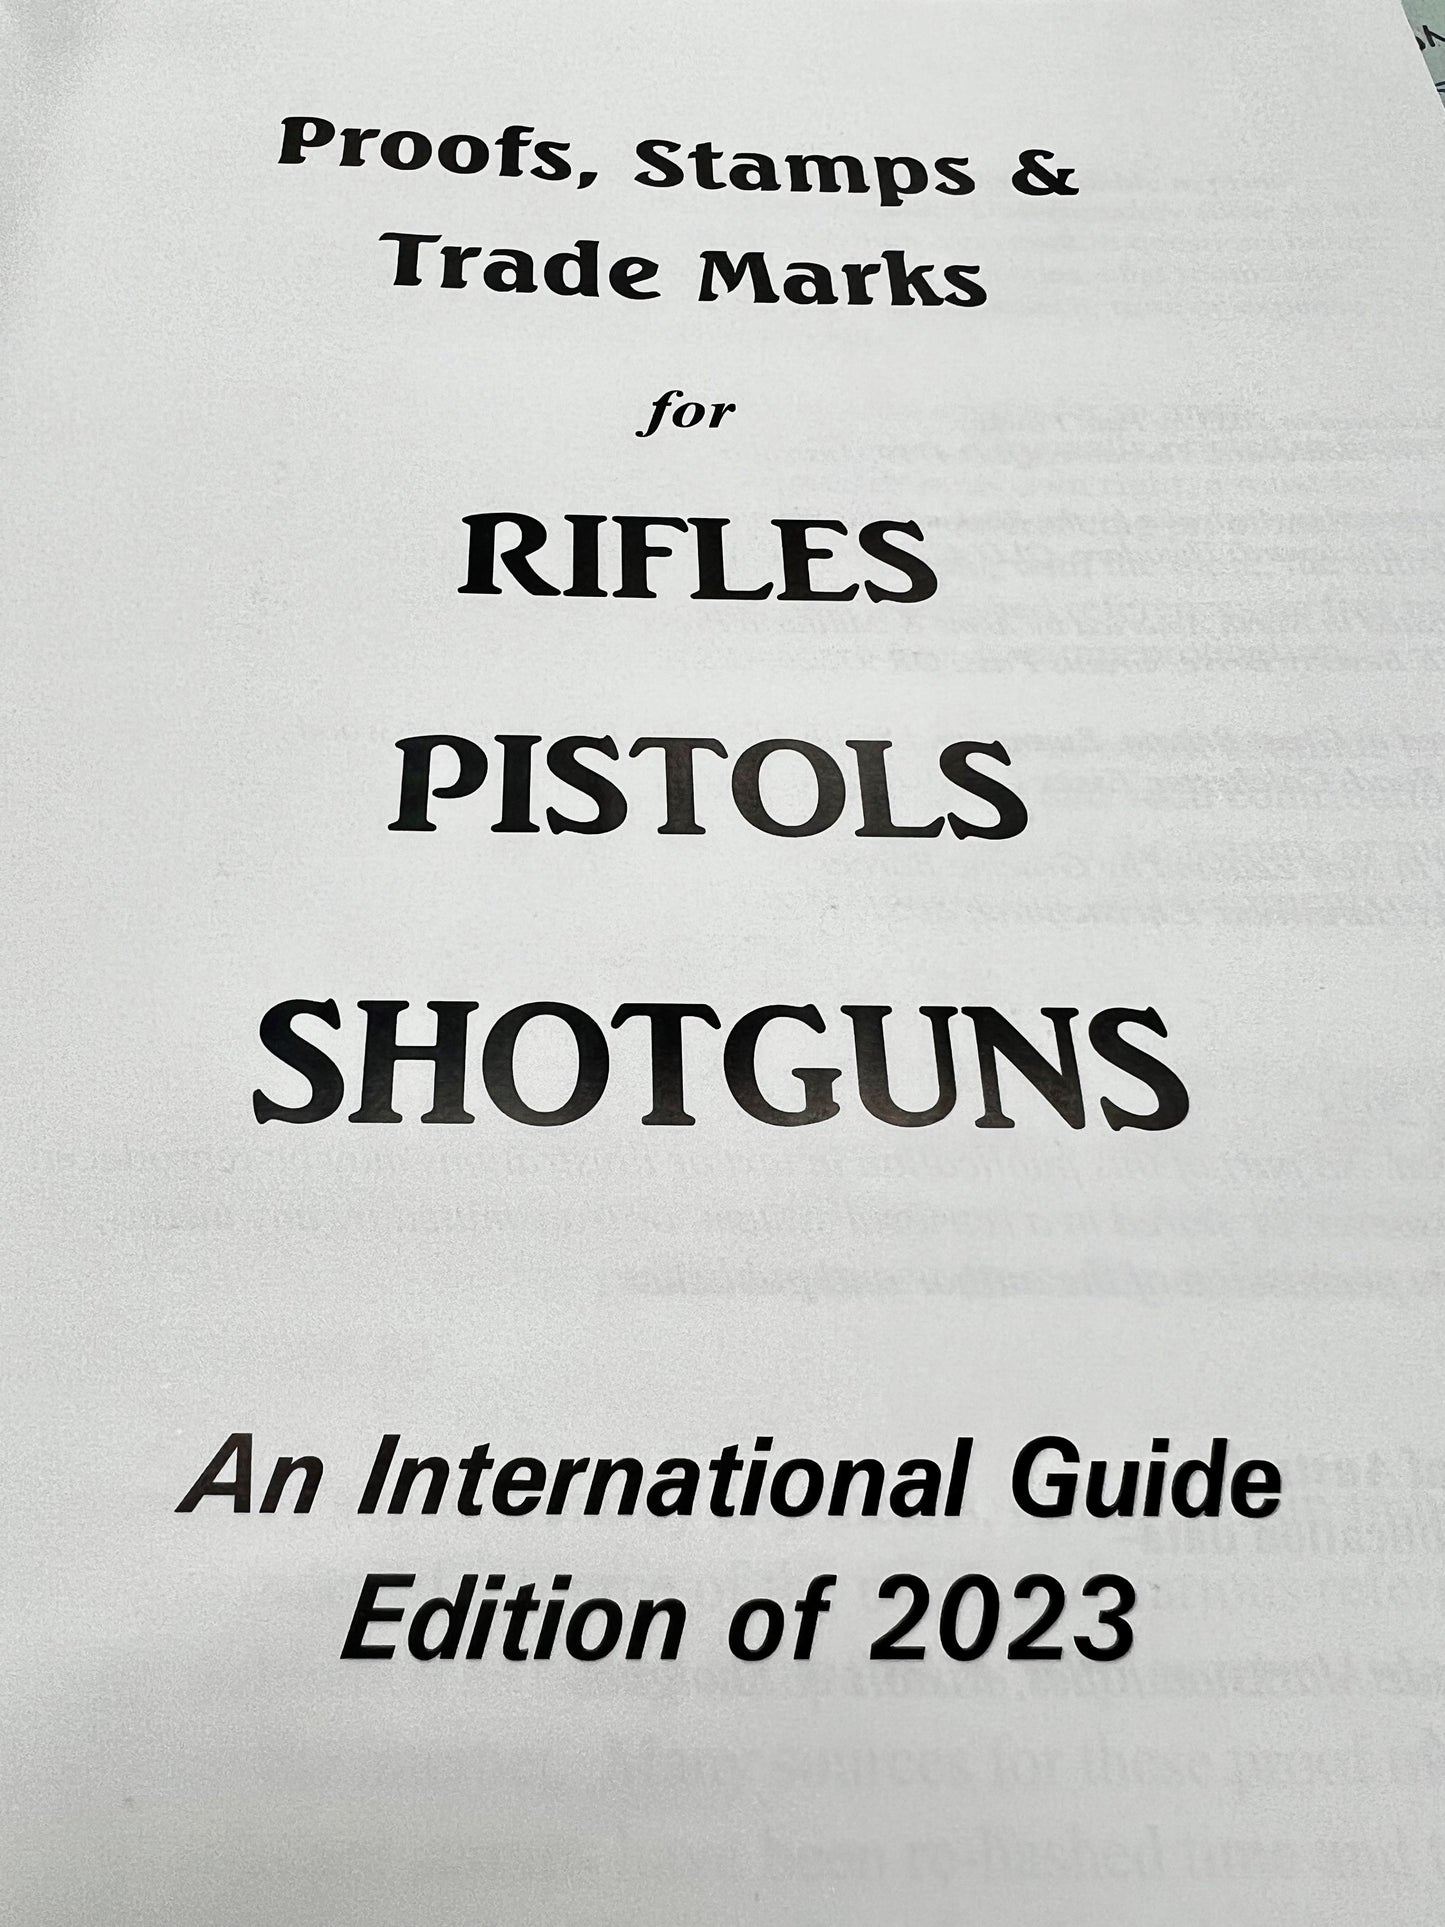 Proofs, Stamps and Trademarks Soft Cover 2023 Edition